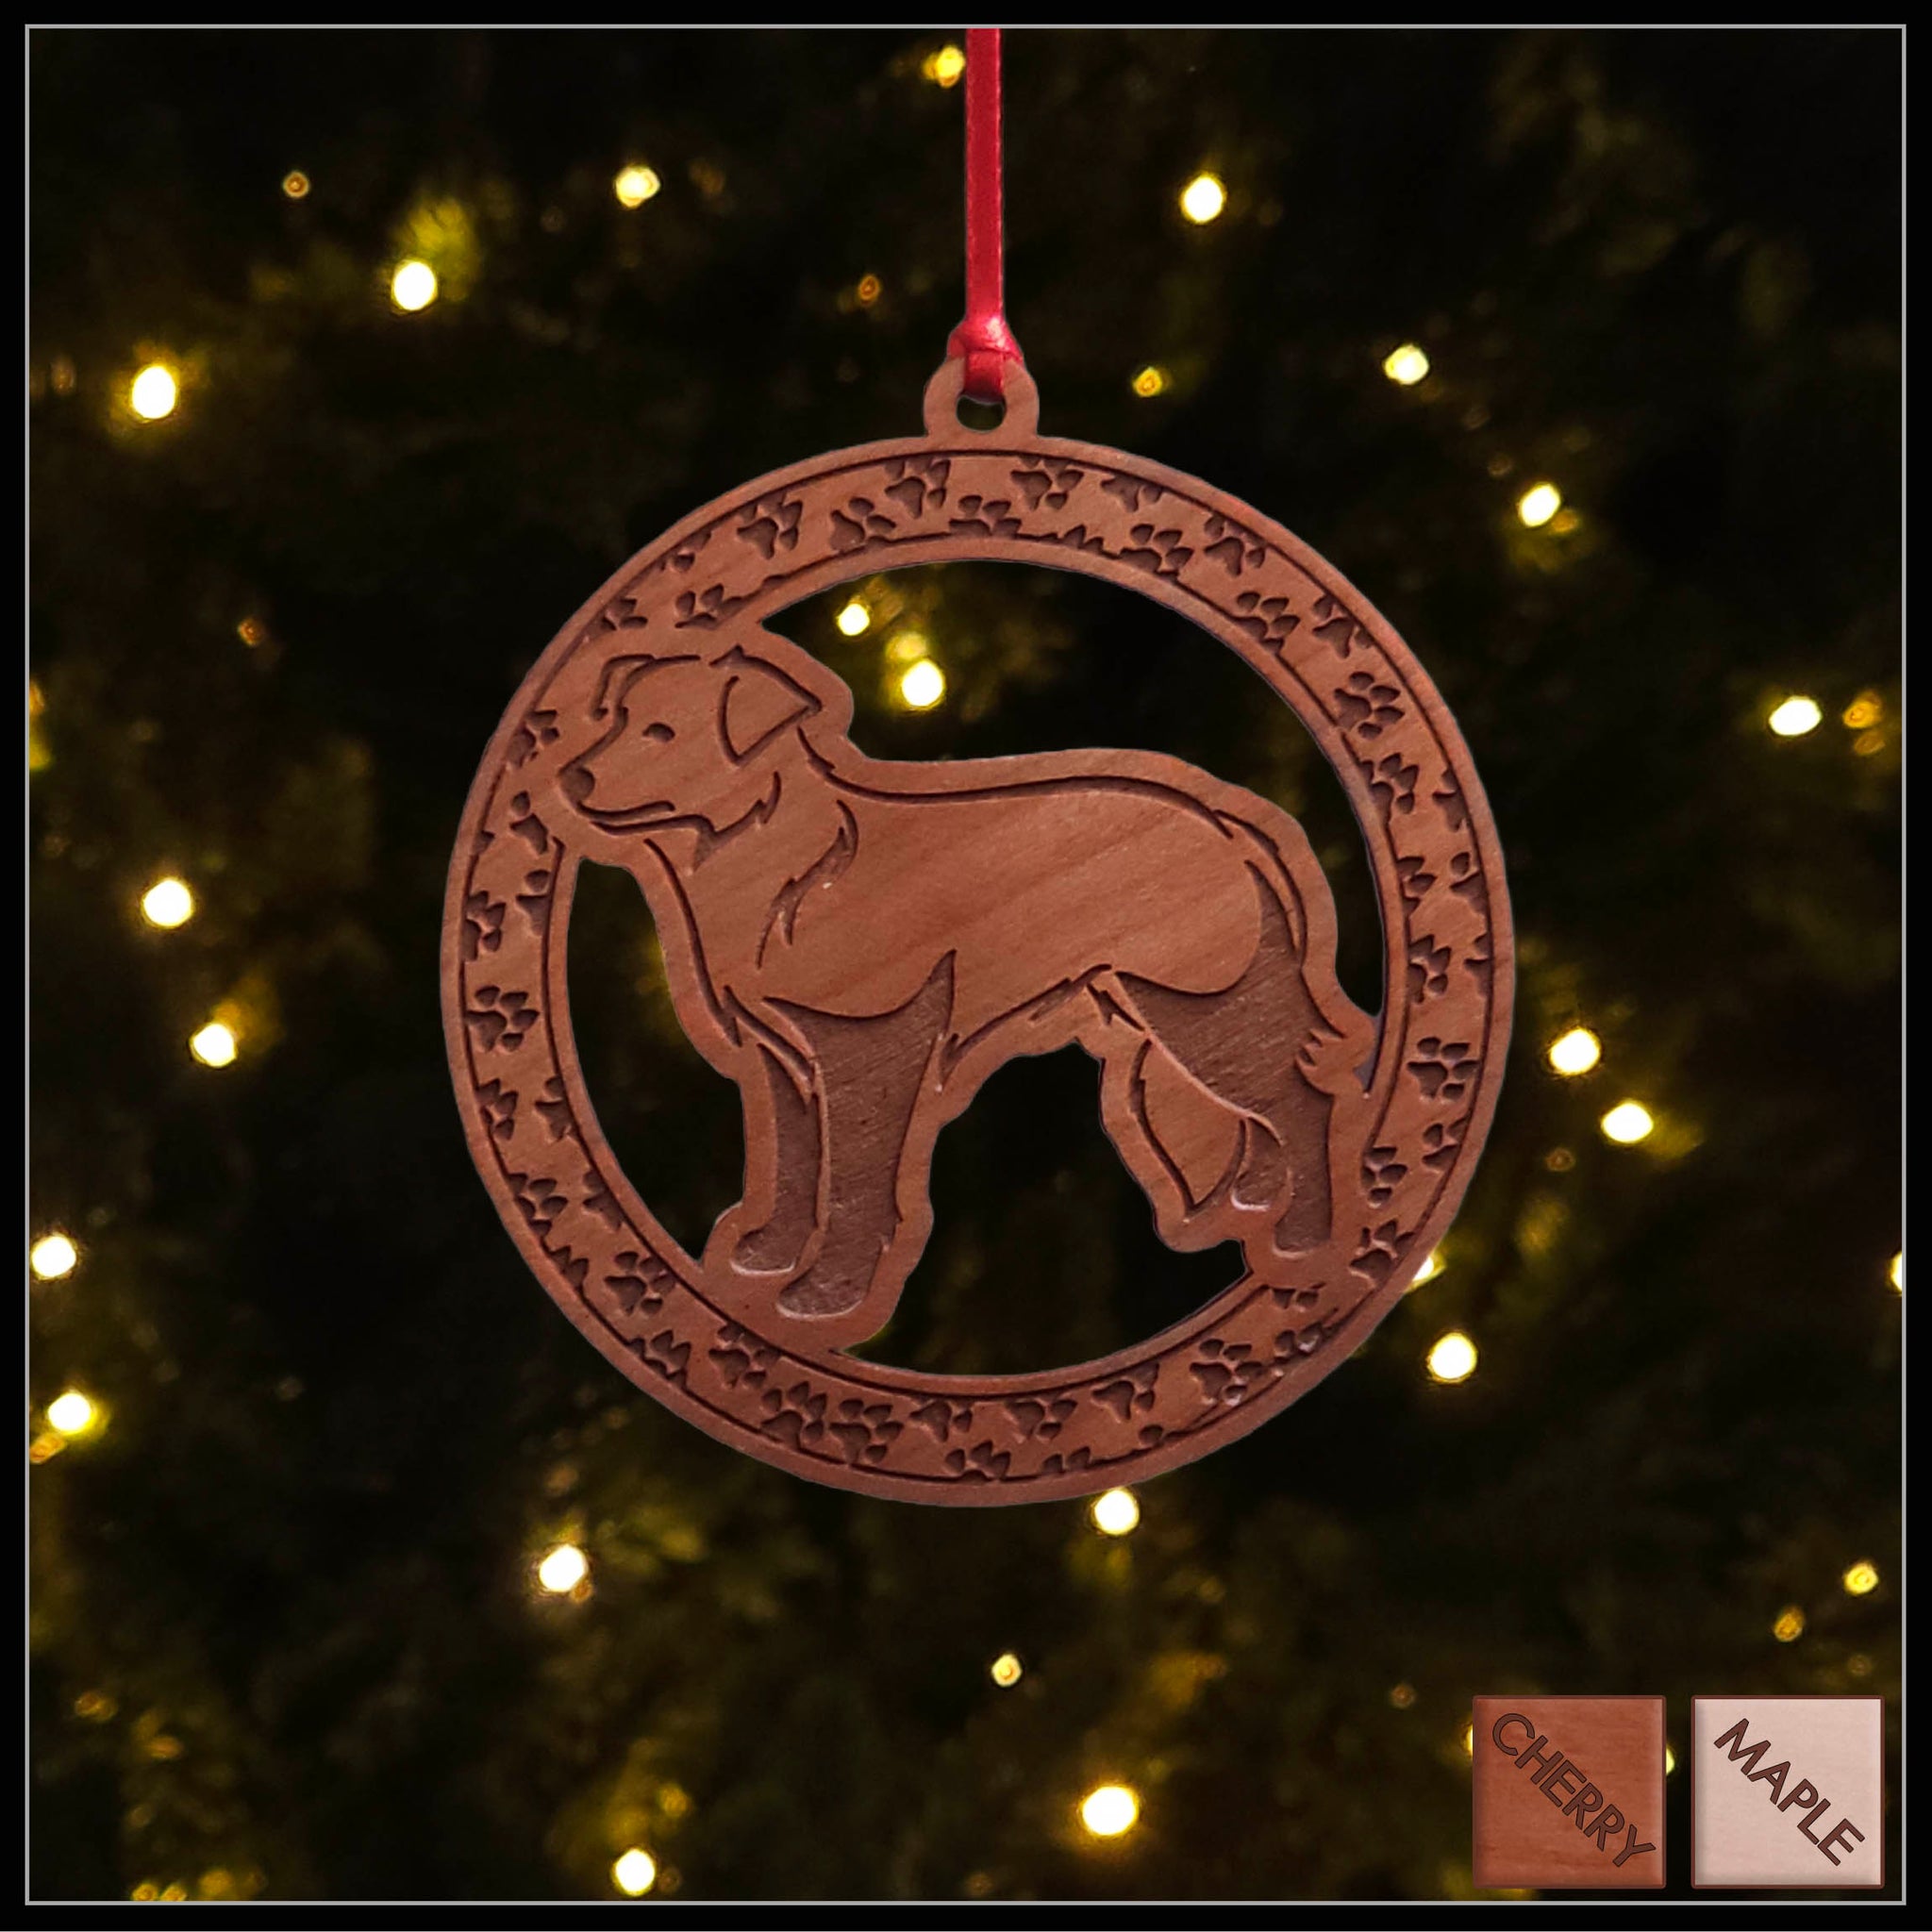 A round cherry wood veneer ornament with a border of small paw prints. The center of the ornament is a border collie dog